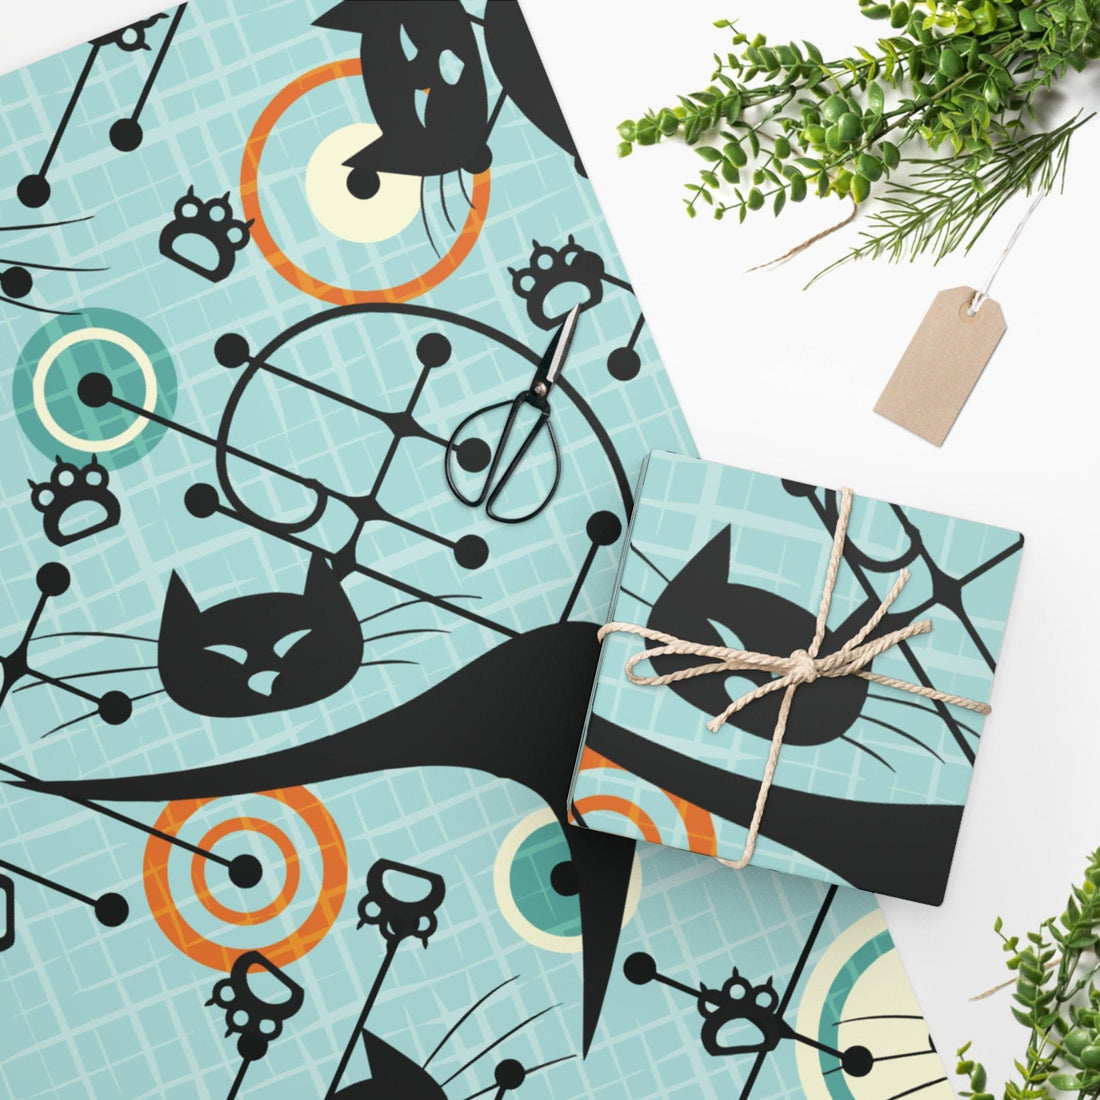 Kate McEnroe New York Atomic Cat Mid - Century Modern Wrapping Paper - 1950s Retro Geometric Blue Holiday Gift WrapWrapping Paper33251730190706649500